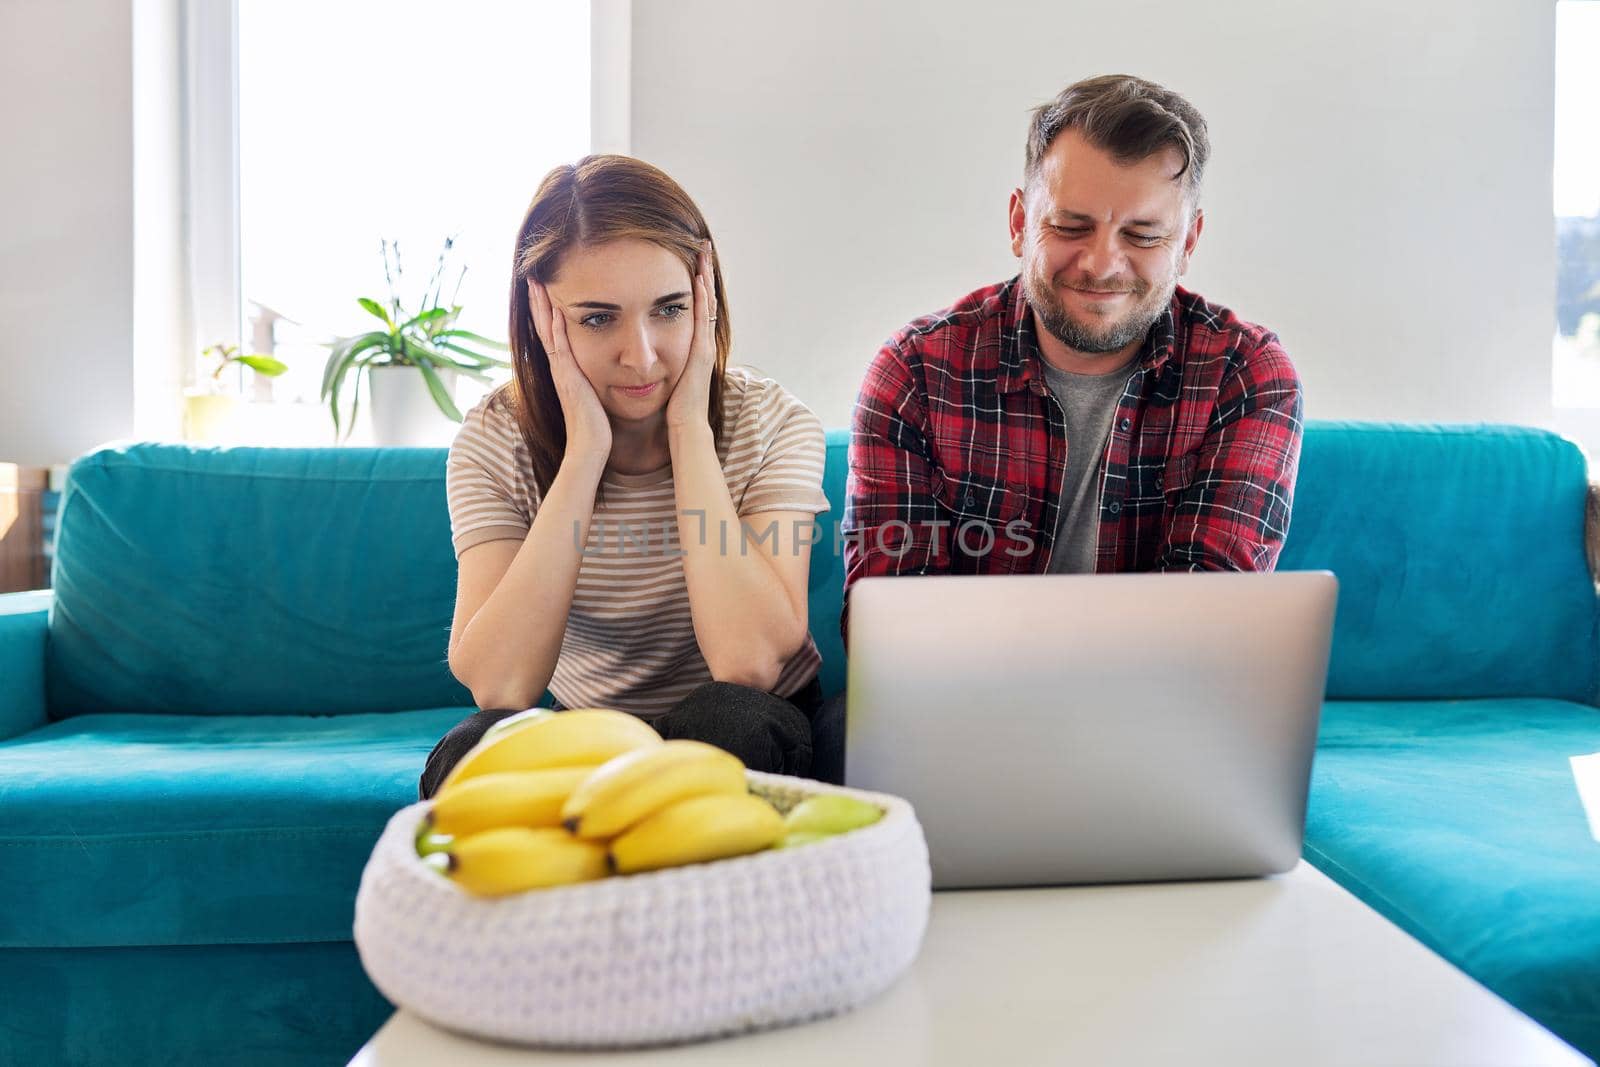 Serious middle aged couple looking at laptop screen at home in living room. Concentrated husband and wife listening looking into laptop, online information. Family, technology, lifestyle, 40s people